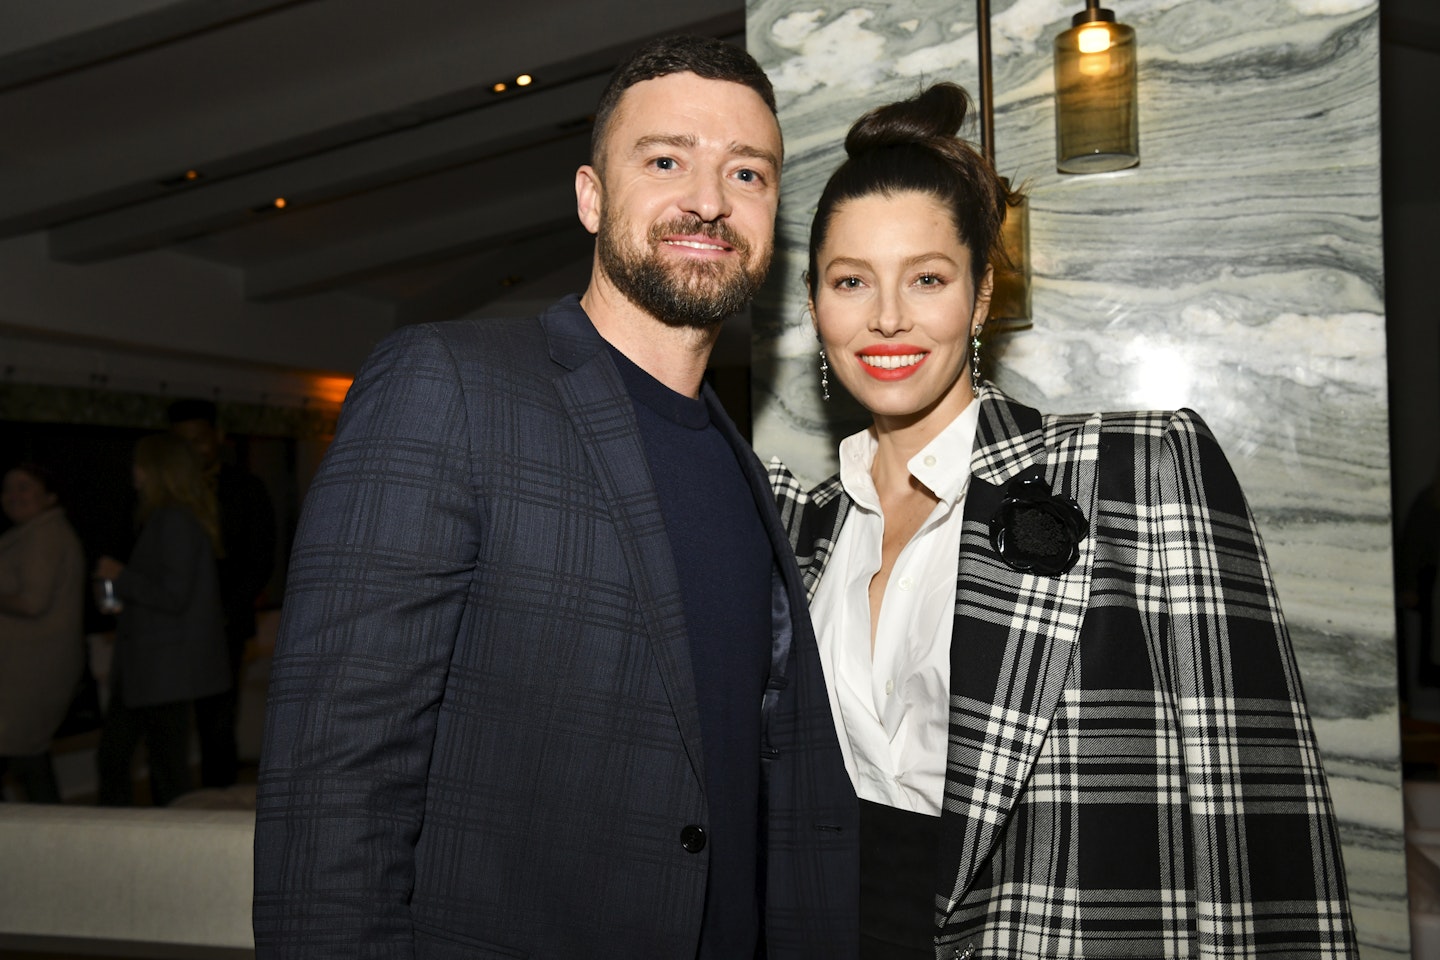 The pair were last pictured on February 3rd at The Sinner's season three premiere